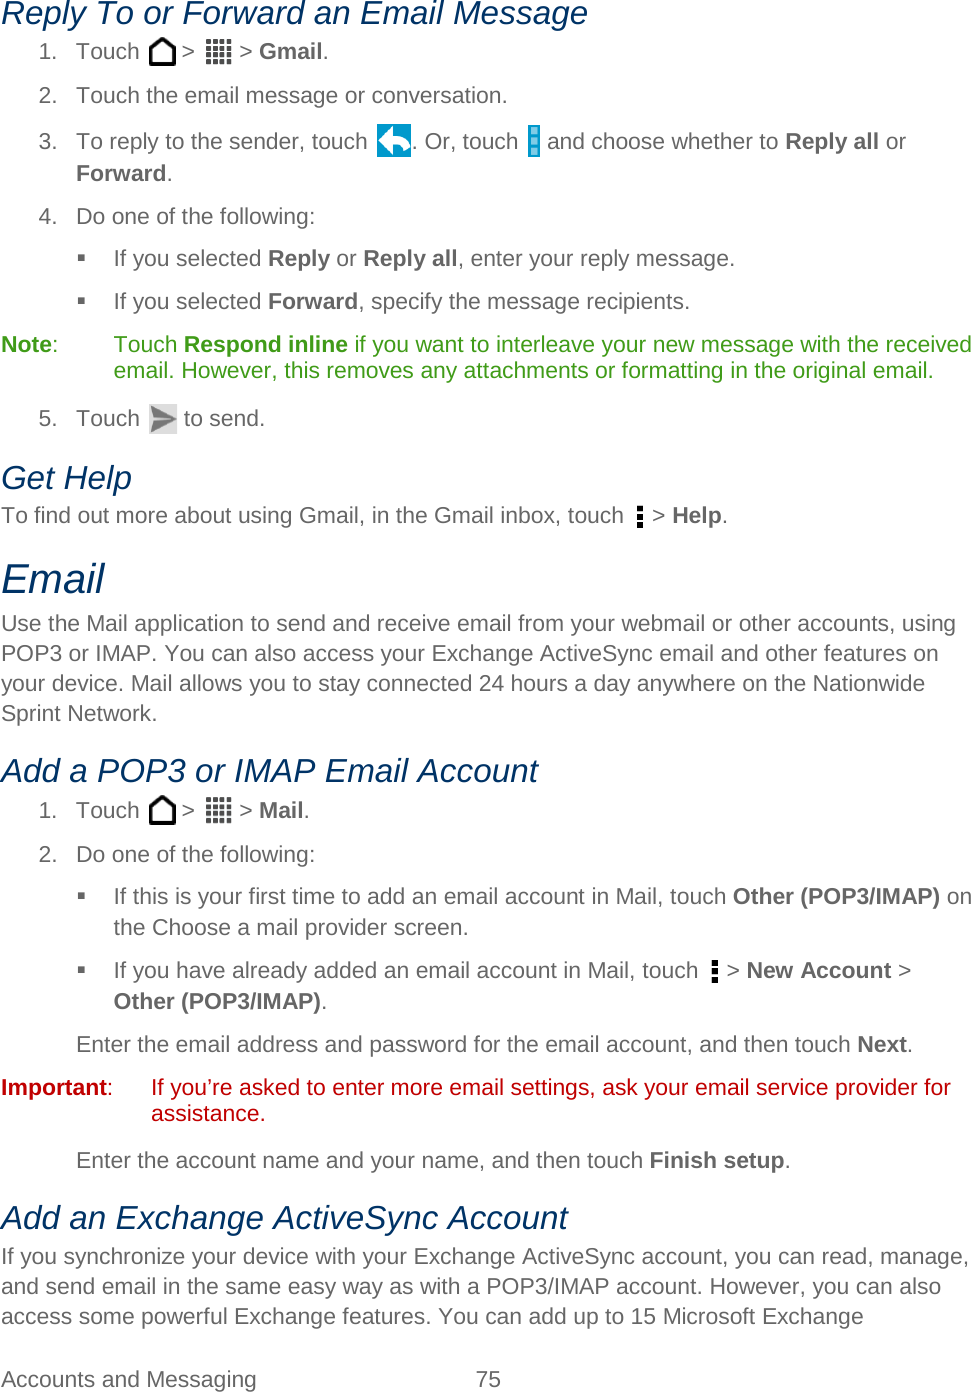  Accounts and Messaging 75   Reply To or Forward an Email Message 1. Touch   &gt;   &gt; Gmail. 2.  Touch the email message or conversation. 3. To reply to the sender, touch . Or, touch   and choose whether to Reply all or Forward. 4. Do one of the following:  If you selected Reply or Reply all, enter your reply message.  If you selected Forward, specify the message recipients. Note:  Touch Respond inline if you want to interleave your new message with the received email. However, this removes any attachments or formatting in the original email. 5. Touch   to send. Get Help To find out more about using Gmail, in the Gmail inbox, touch   &gt; Help. Email Use the Mail application to send and receive email from your webmail or other accounts, using POP3 or IMAP. You can also access your Exchange ActiveSync email and other features on your device. Mail allows you to stay connected 24 hours a day anywhere on the Nationwide Sprint Network. Add a POP3 or IMAP Email Account 1. Touch   &gt;   &gt; Mail. 2. Do one of the following:  If this is your first time to add an email account in Mail, touch Other (POP3/IMAP) on the Choose a mail provider screen.  If you have already added an email account in Mail, touch   &gt; New Account &gt; Other (POP3/IMAP). Enter the email address and password for the email account, and then touch Next.  Important:  If you’re asked to enter more email settings, ask your email service provider for assistance. Enter the account name and your name, and then touch Finish setup. Add an Exchange ActiveSync Account If you synchronize your device with your Exchange ActiveSync account, you can read, manage, and send email in the same easy way as with a POP3/IMAP account. However, you can also access some powerful Exchange features. You can add up to 15 Microsoft Exchange 